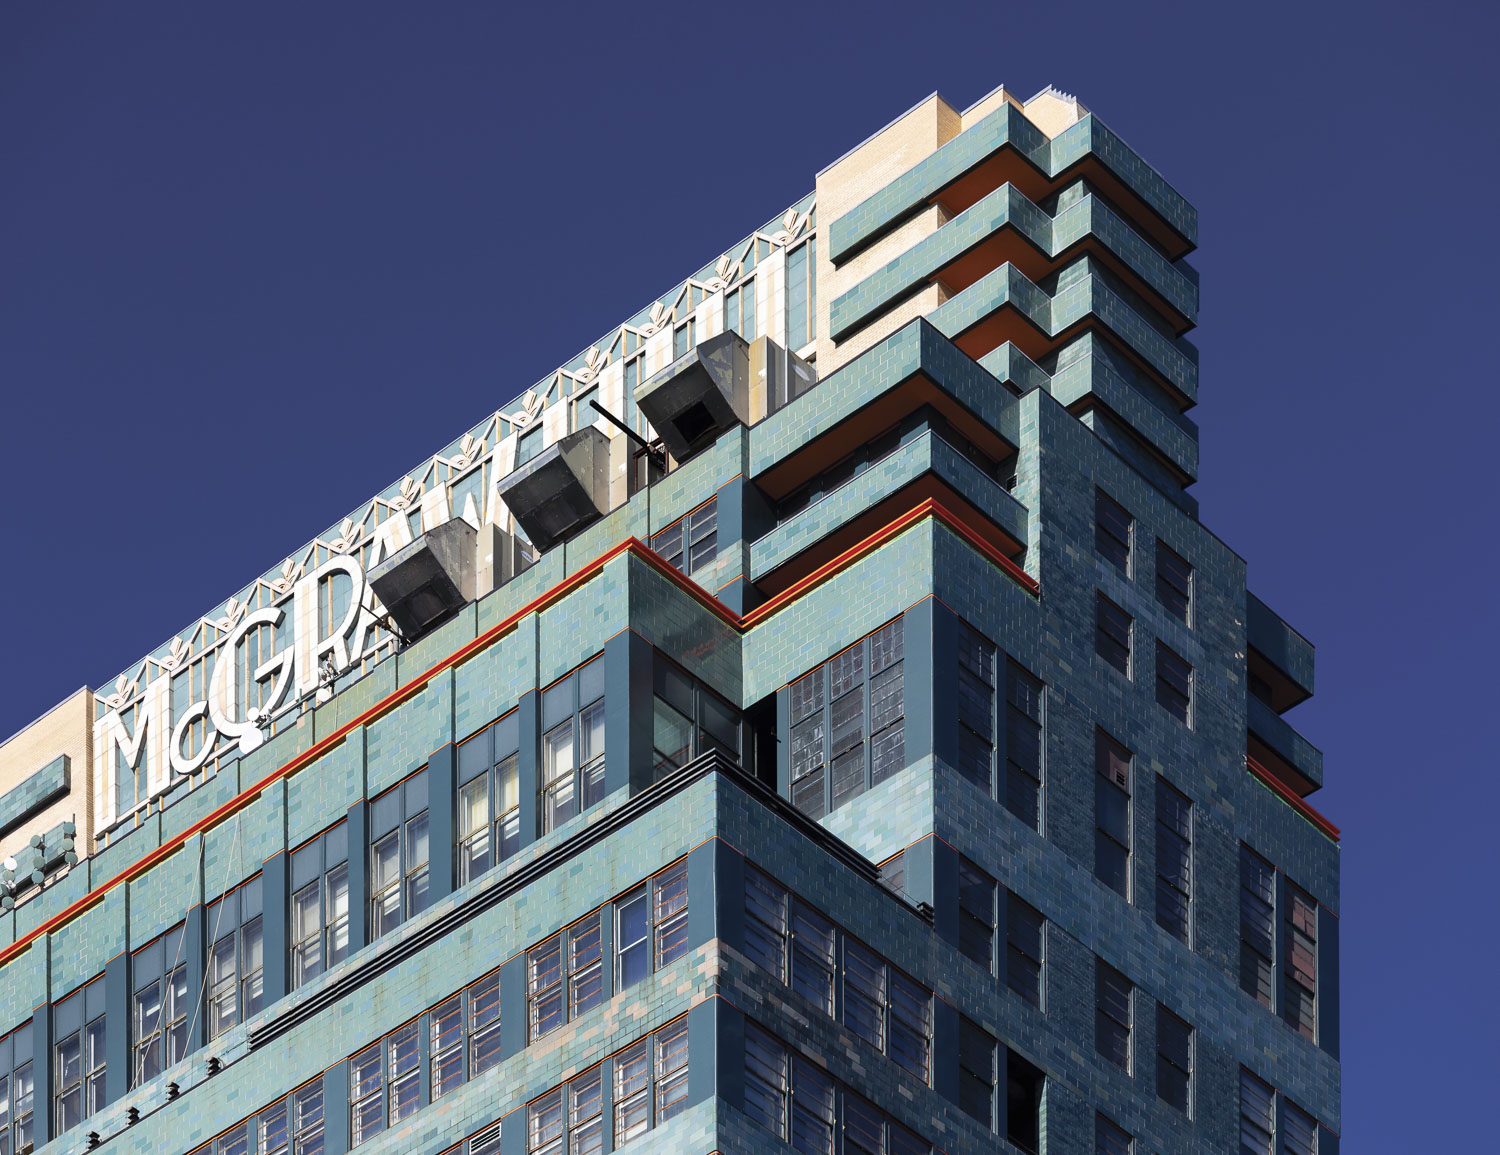 A detail photograph of the top of a skyscraper taken from a low angle. Horizontal bands of blue-gray windows alternate with continuous strips of blue-green terra cotta tiles. The company name is spelled out in large white terra cotta letters at the apex: “McGRAW-HILL.” Narrow lines of bright orange and small areas of tan adorn the facade. Boxy shapes at either end of the roof sign provide additional ornament.